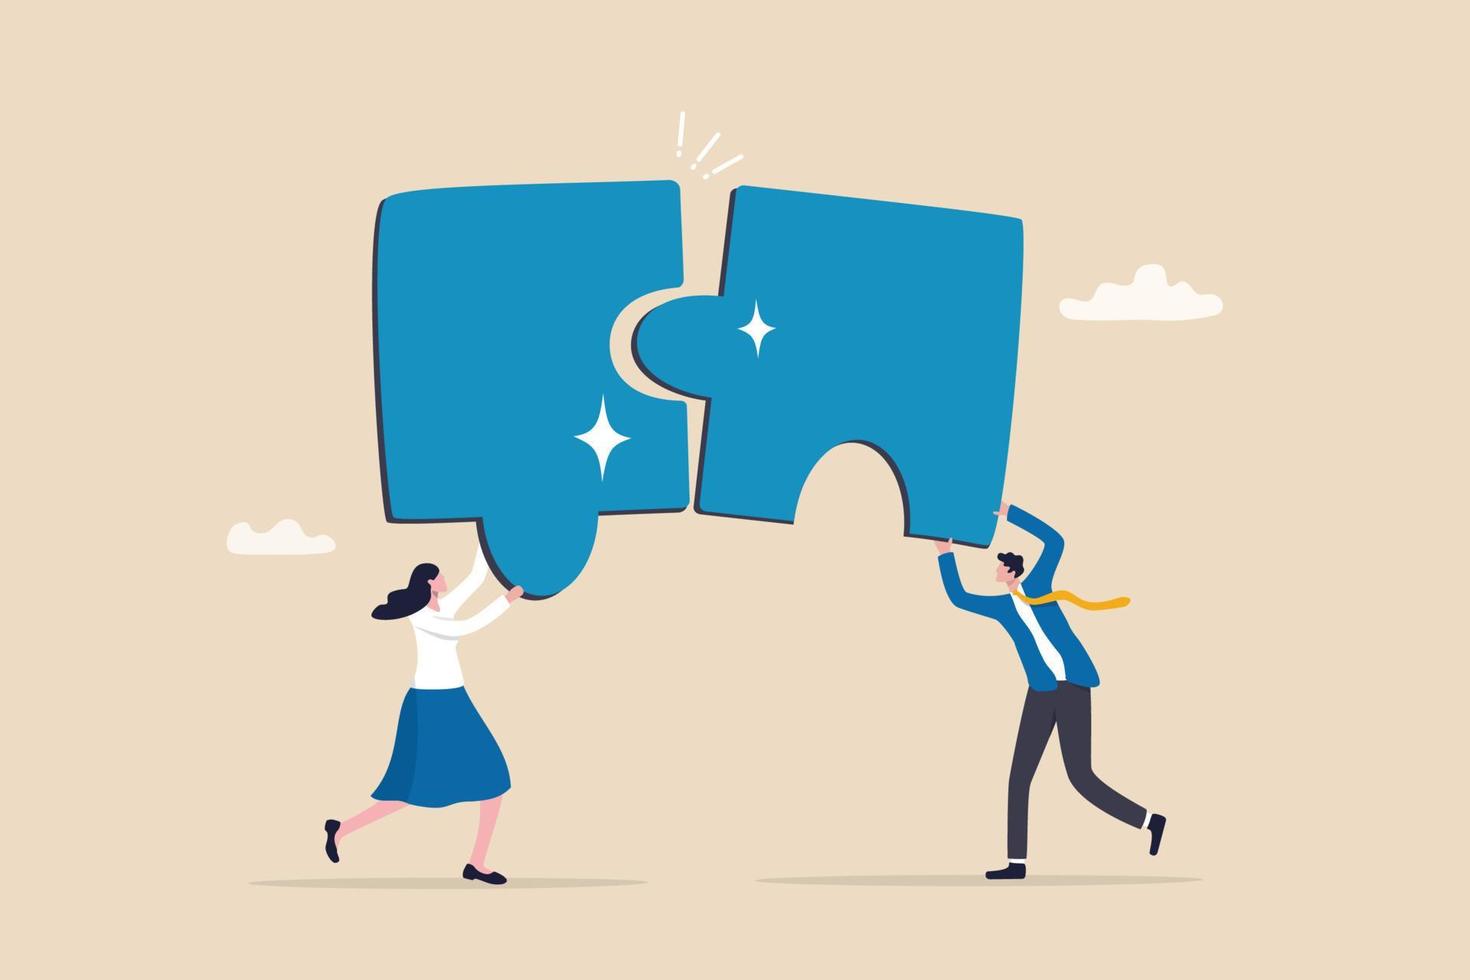 Partnership working together for success, friendship or connection to help solve problem, teamwork or unity to cooperate and overcome challenge, businessman and woman partner connect jigsaw puzzle. vector